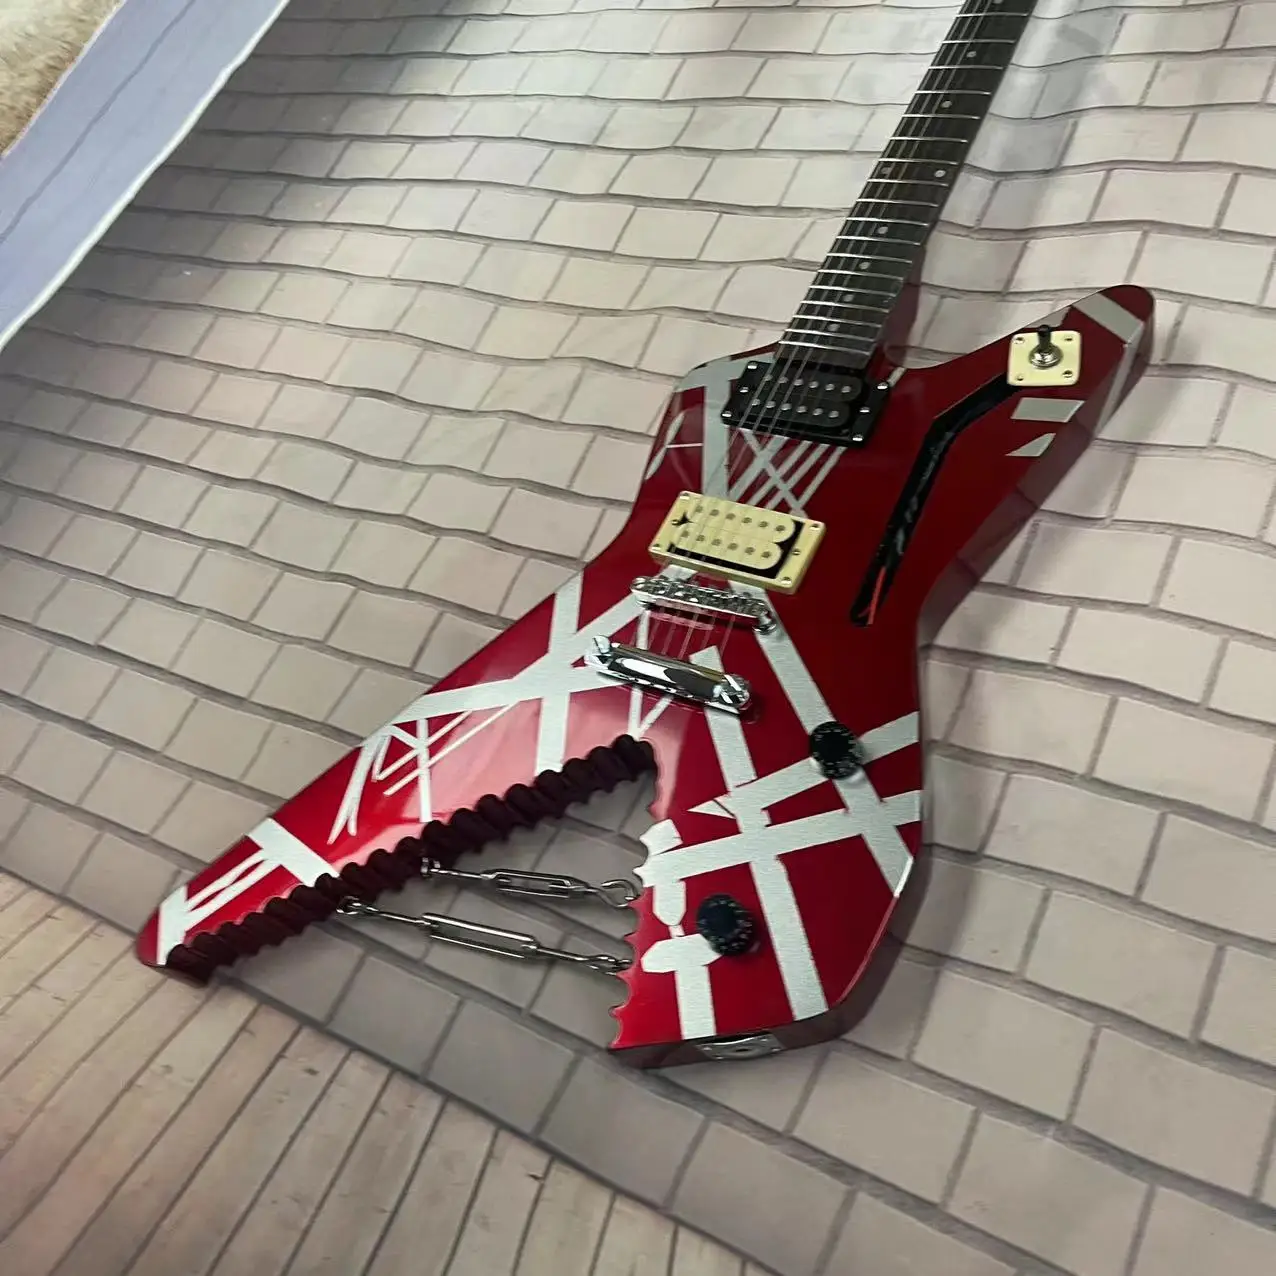 

Hot selling 6-string integrated electric guitar, metal red body with bare color stripes, high gloss, rose wood fingerboard, mapl